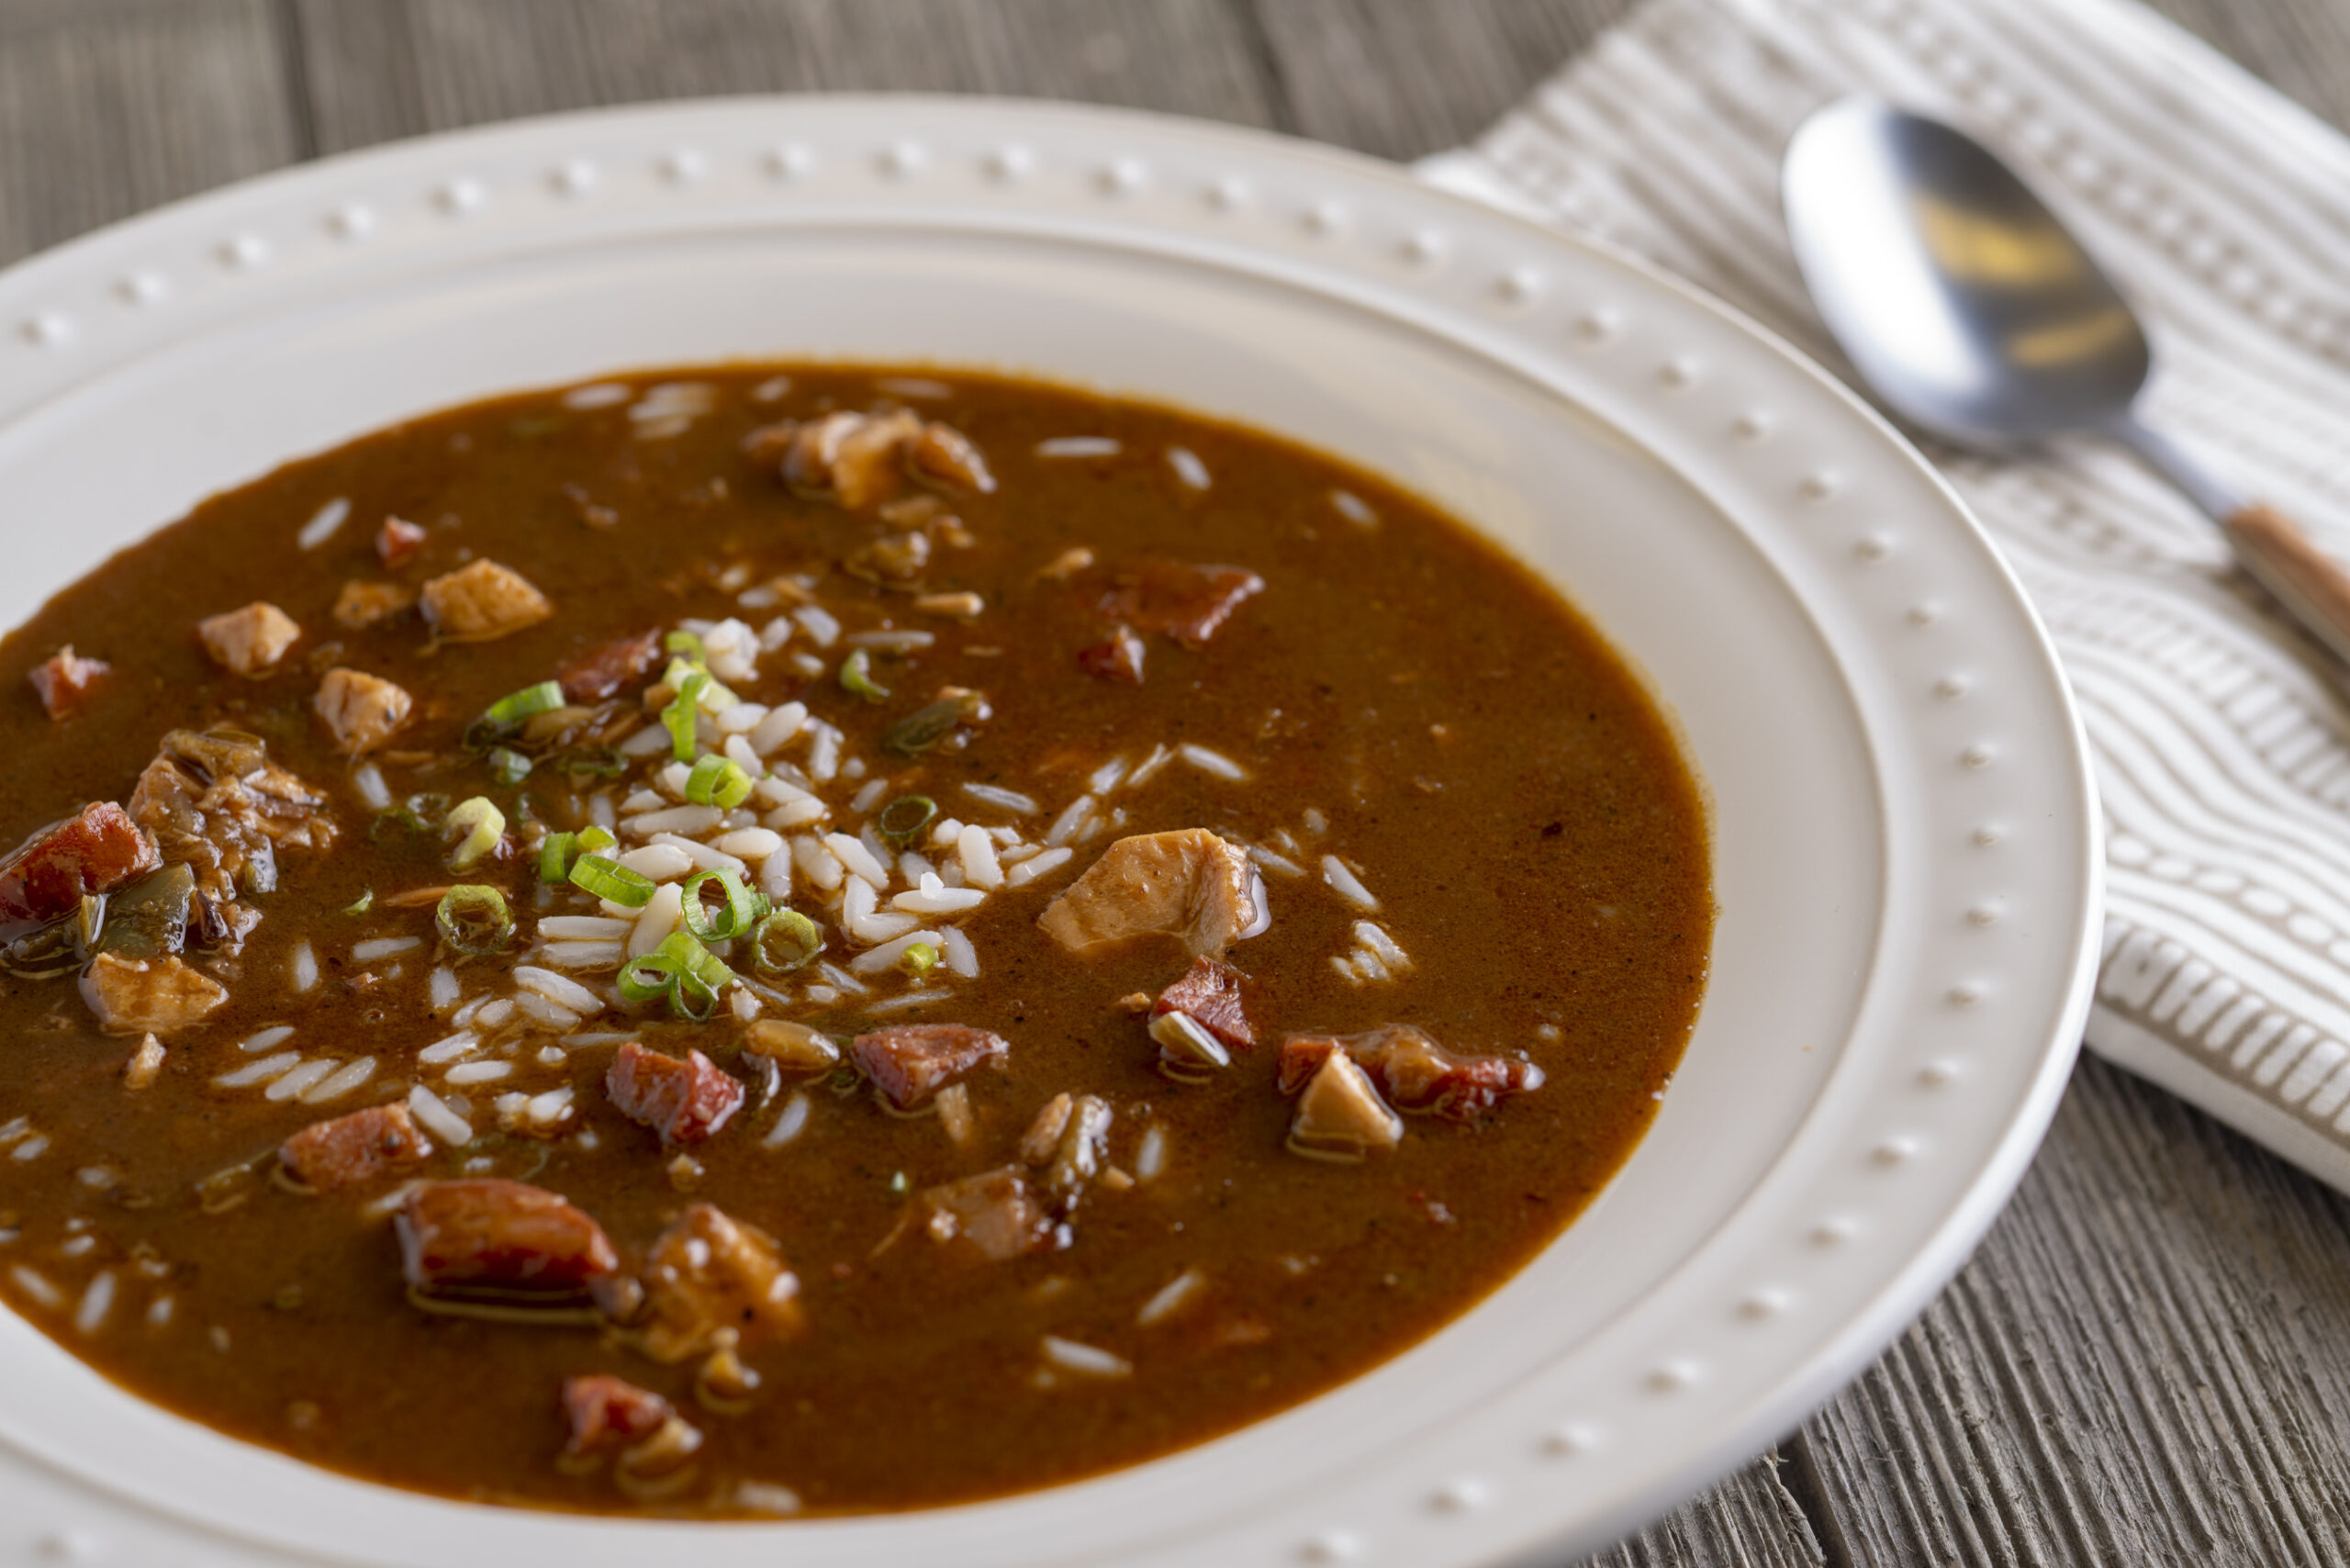 Chicken and Andouille Smoked Sausage Gumbo